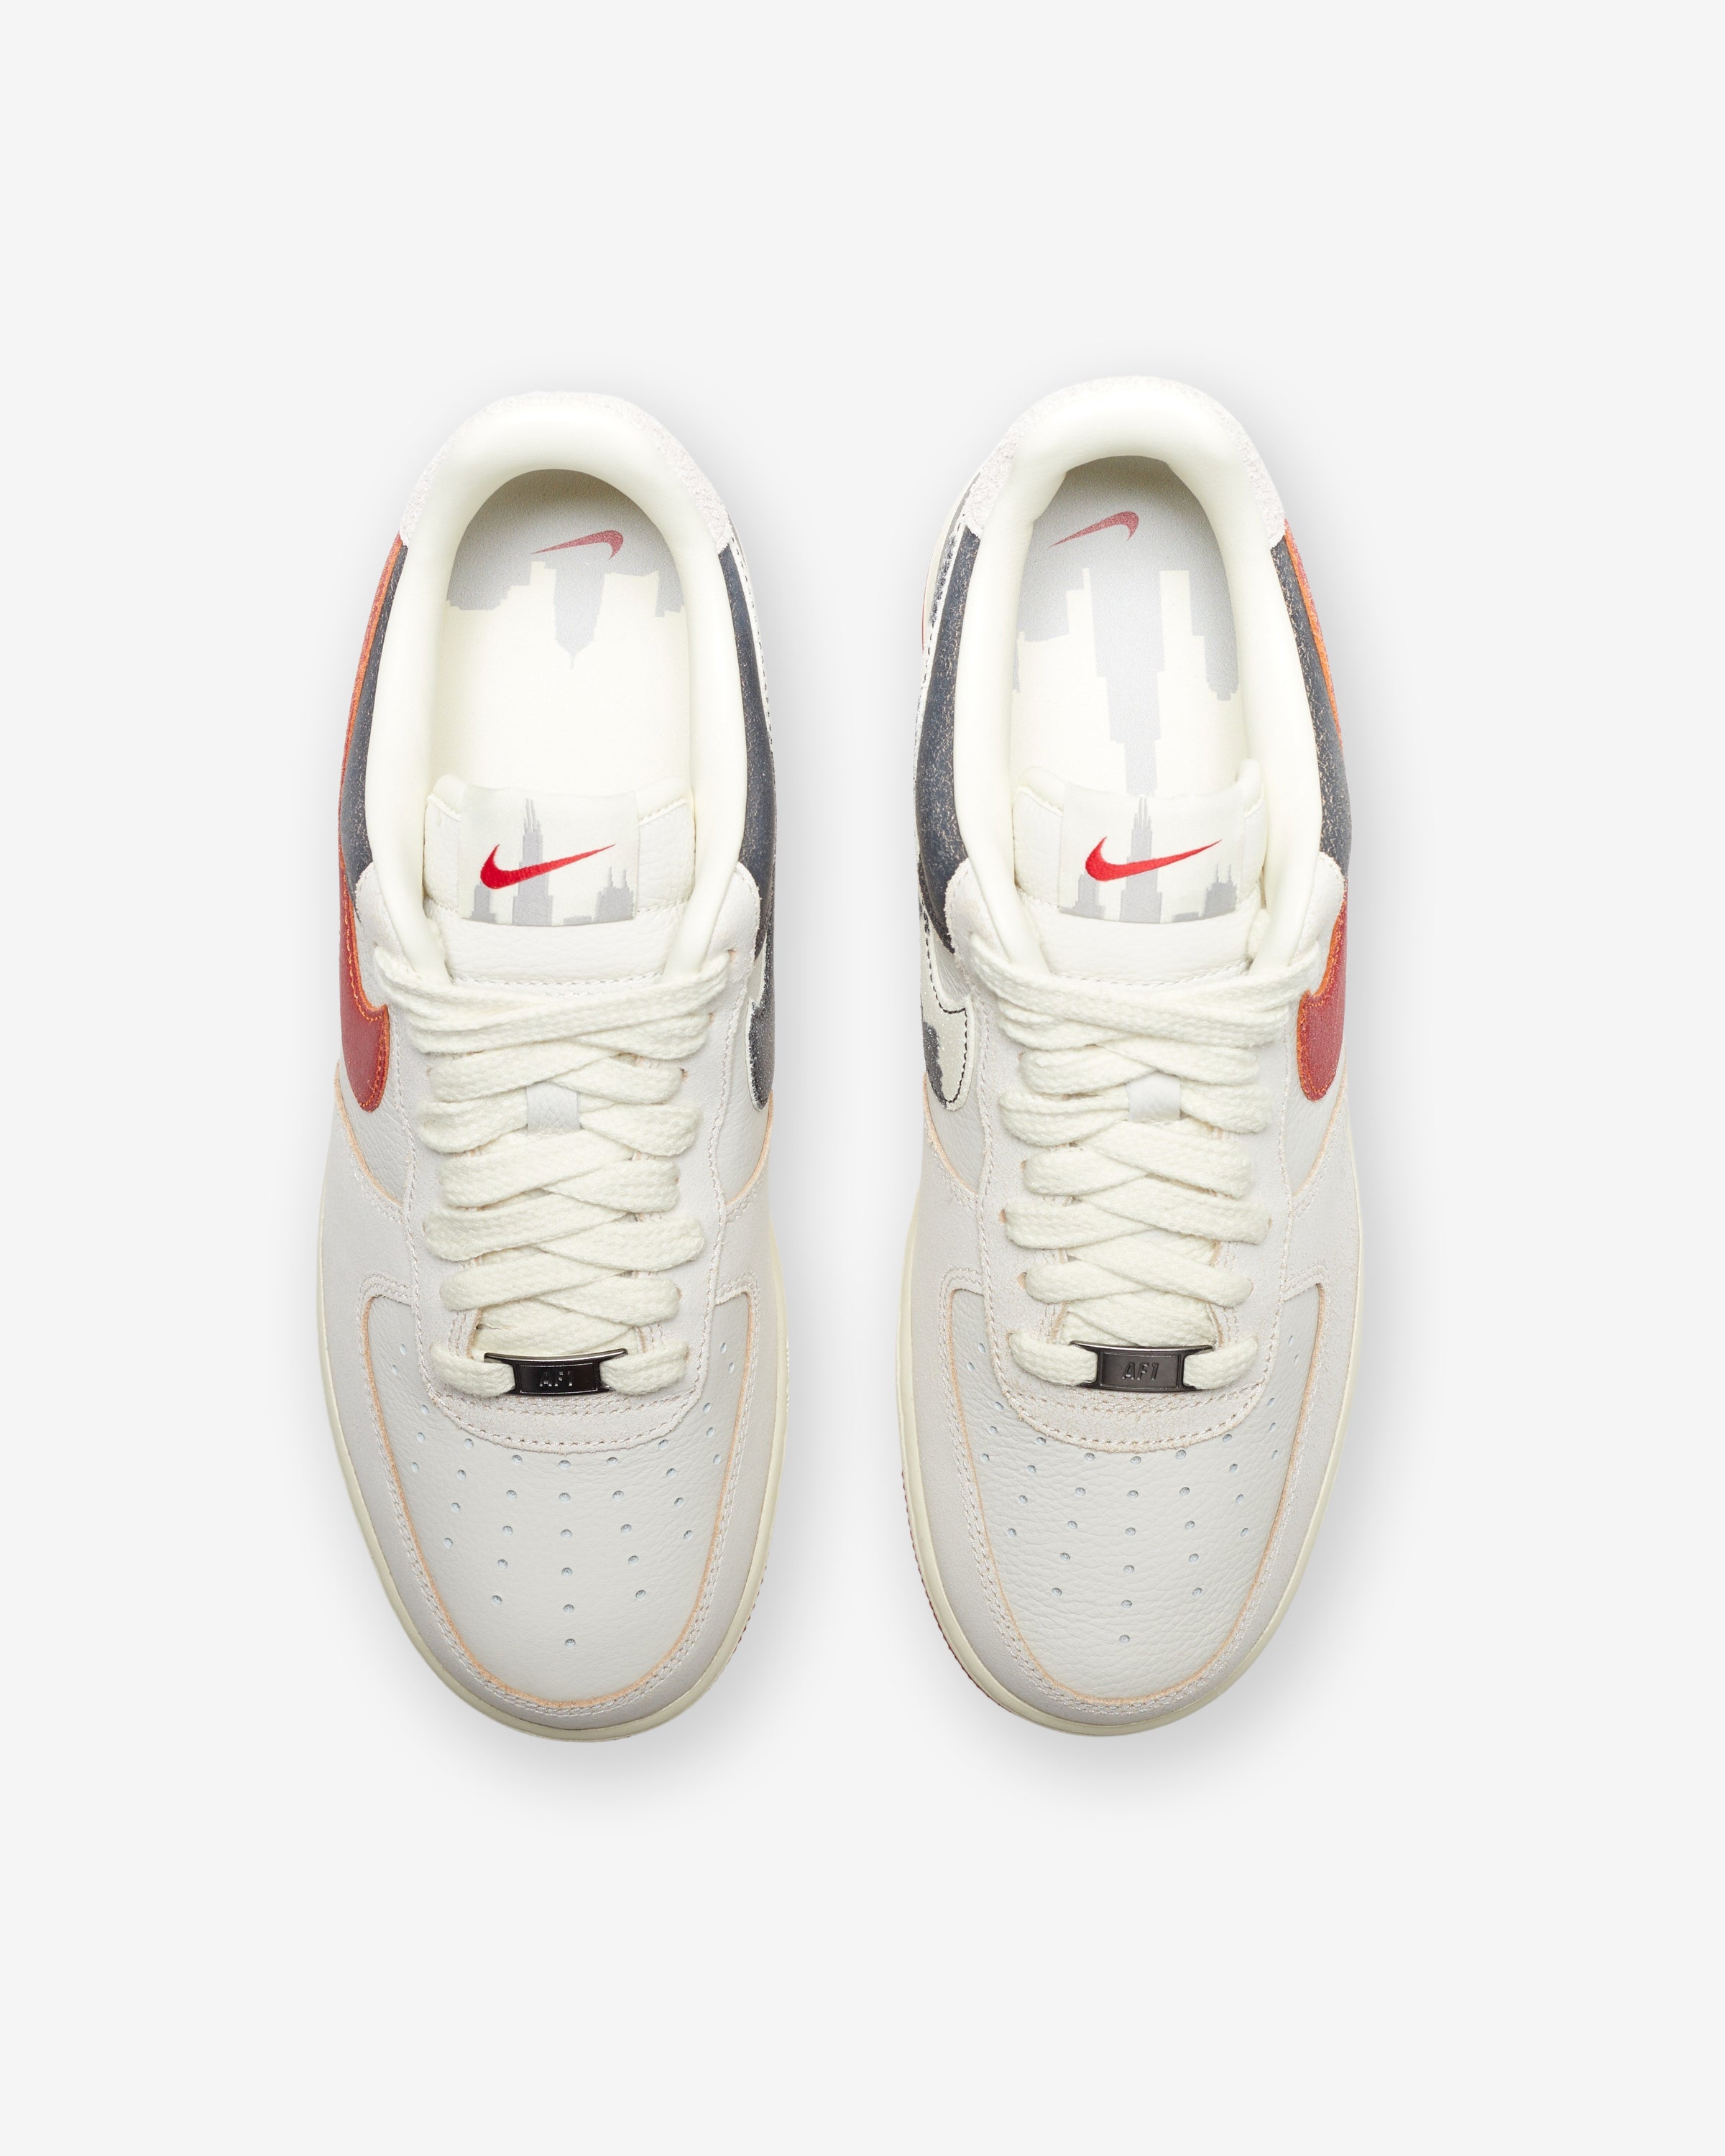 NIKE AIR FORCE 1 '07 PRM - SUMMITWHITE/ GYMRED/ COCONUTMILK